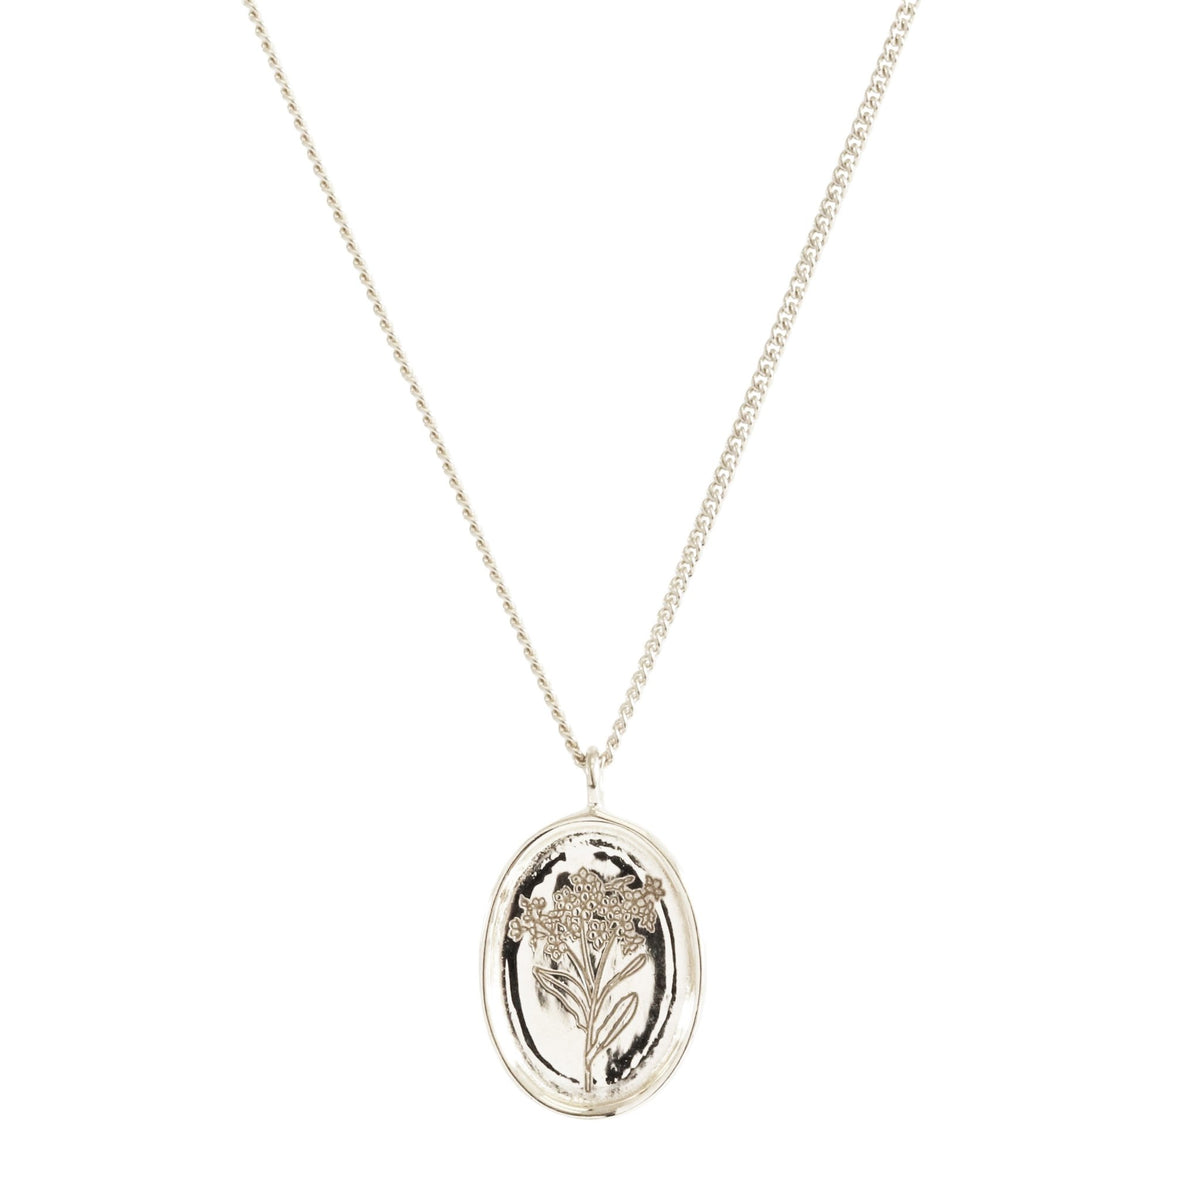 FRAICHE INSPIRE FORGET ME NOT NECKLACE - SILVER - SO PRETTY CARA COTTER